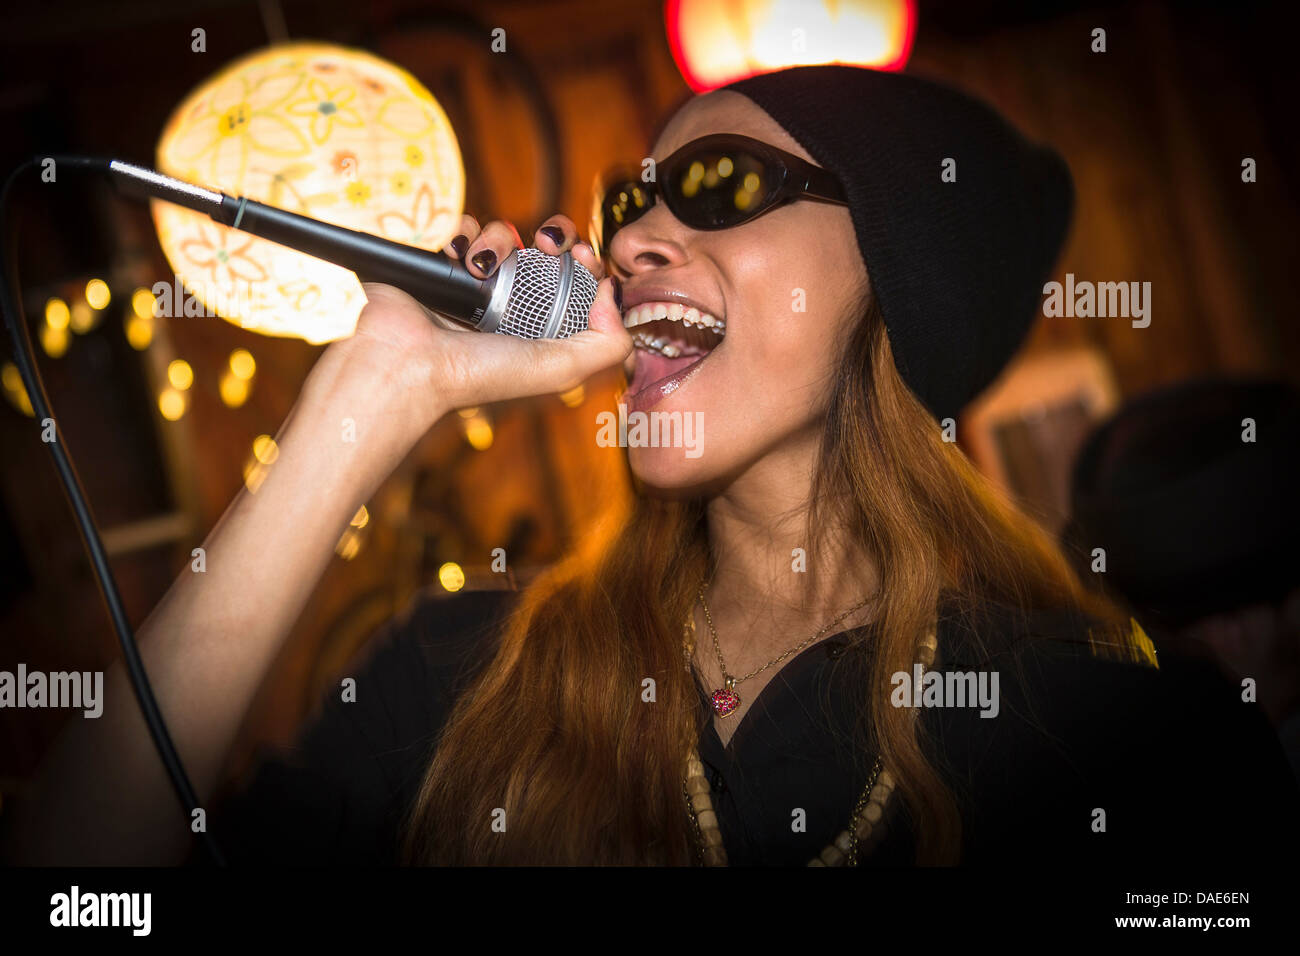 Woman wearing hat and sunglasses singing in microphone Stock Photo